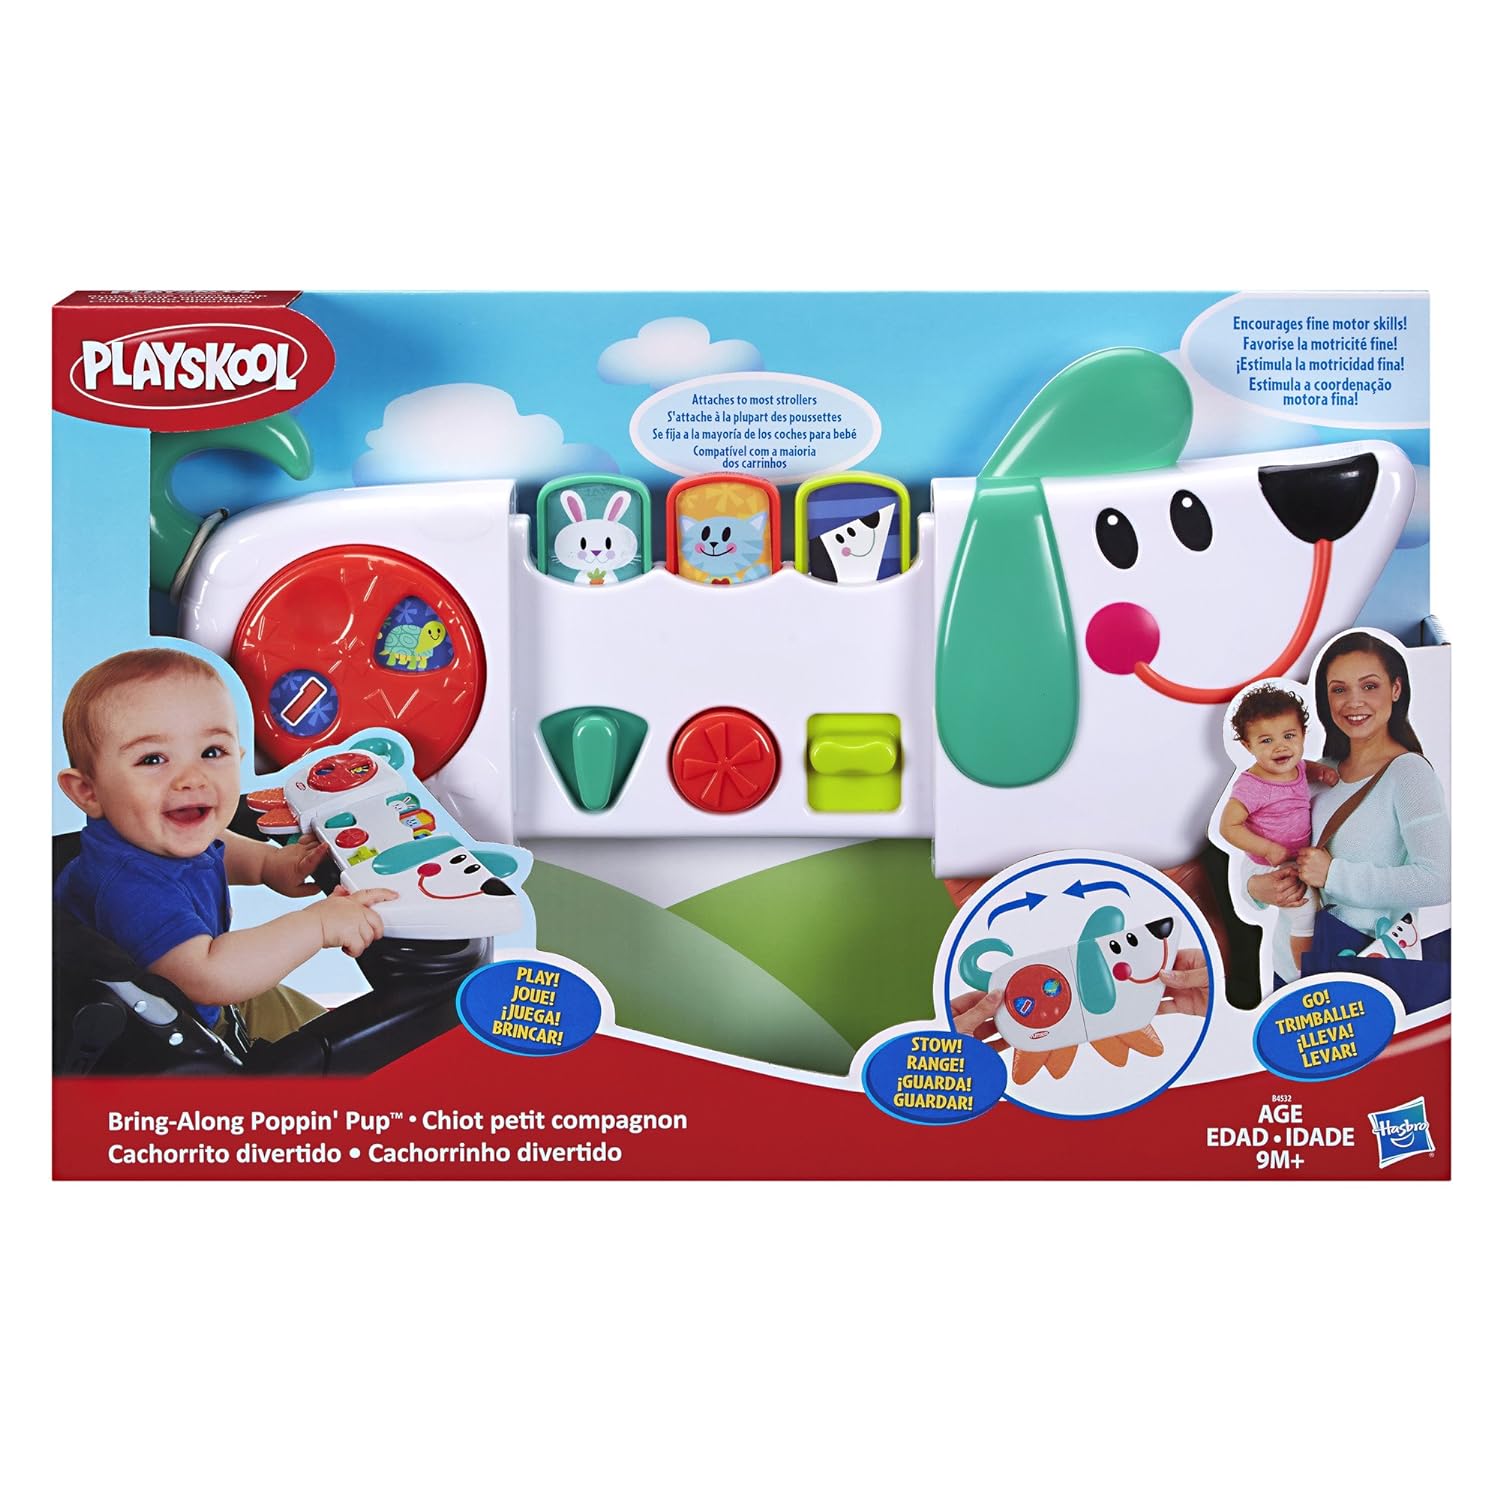 Hasbro Playskool Bring-Along Poppin' Pup, For Kids Ages 9 months and Up